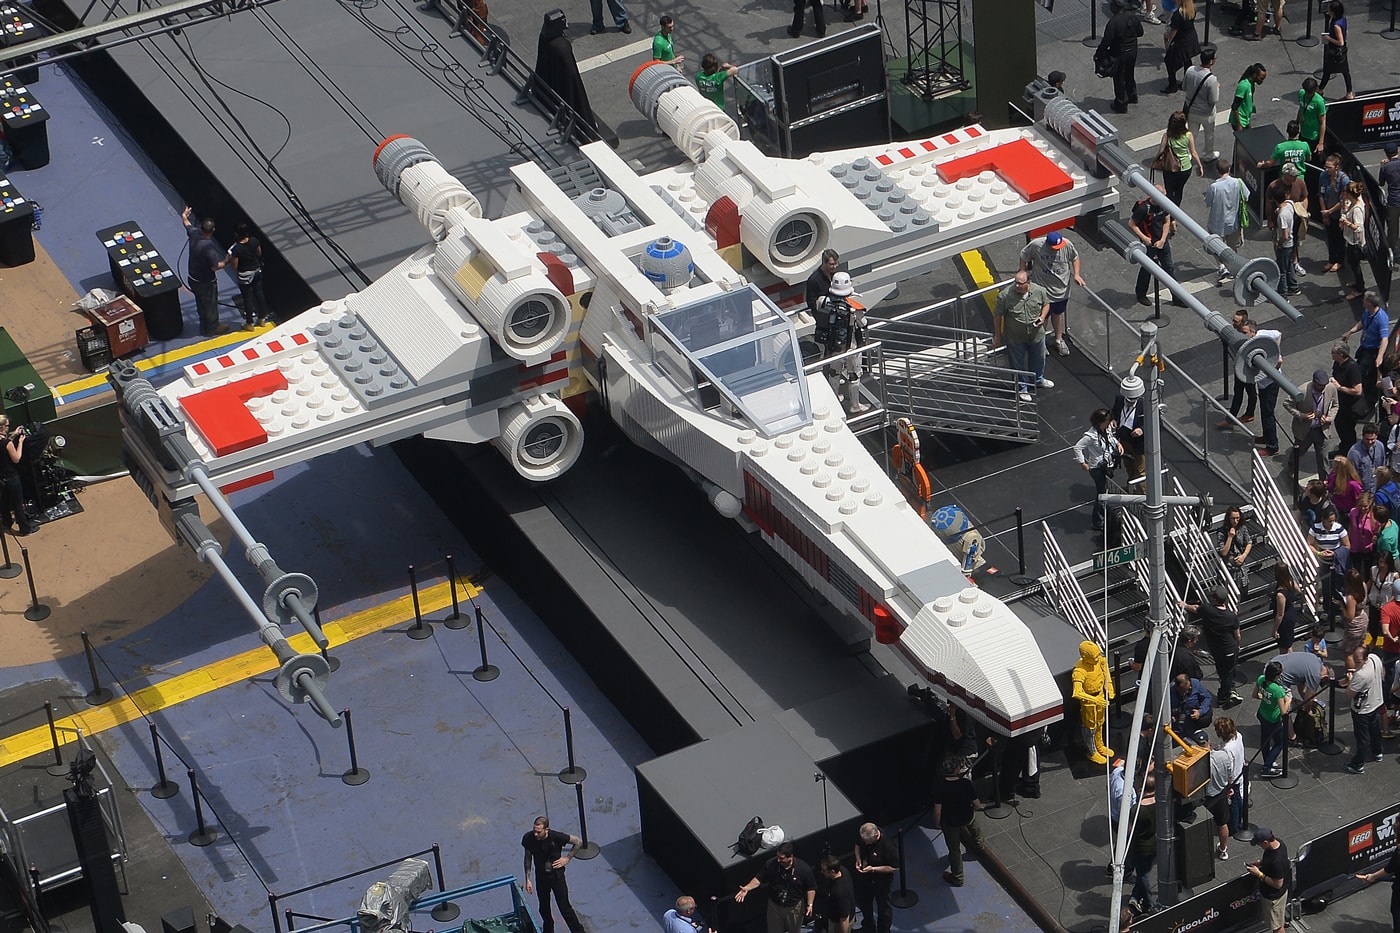 LEGO Life-Sized X-Wing for the Paris Air Show